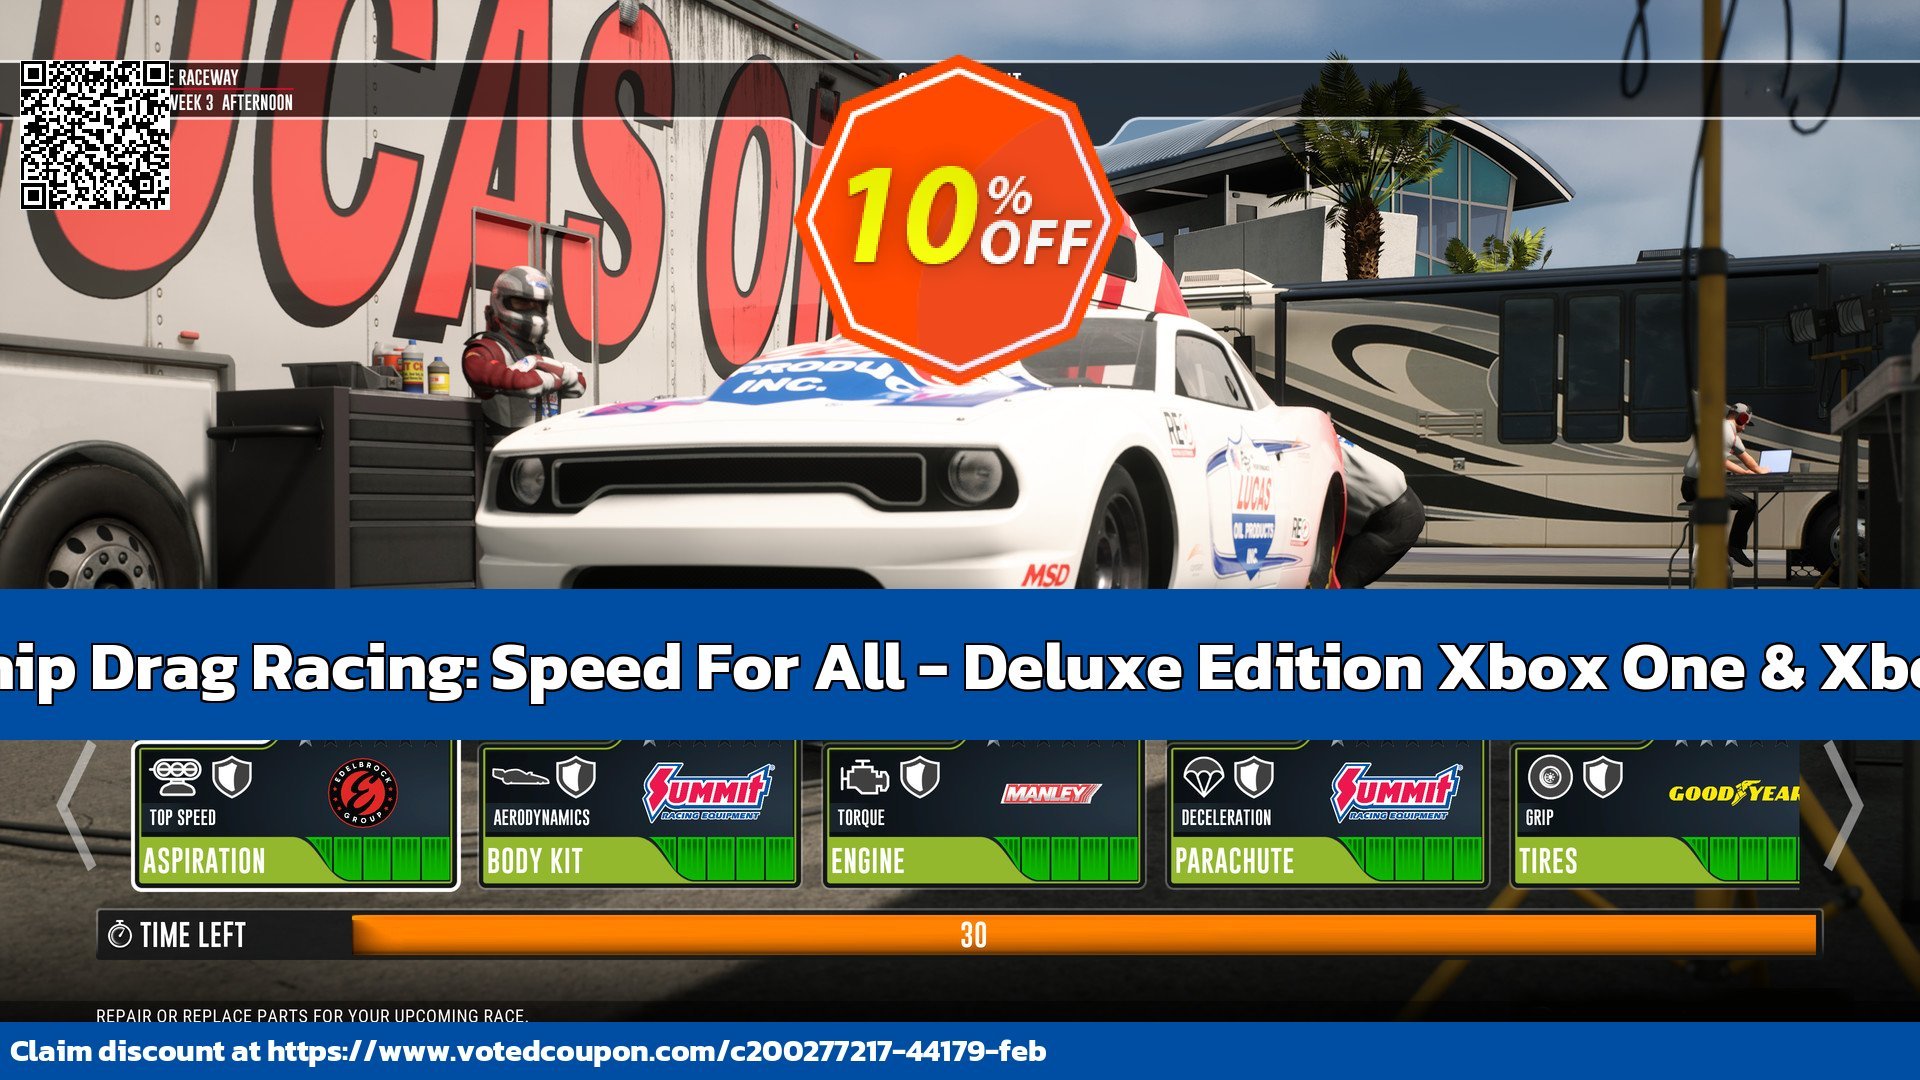 NHRA Championship Drag Racing: Speed For All - Deluxe Edition Xbox One & Xbox Series X|S, WW  Coupon Code May 2024, 10% OFF - VotedCoupon